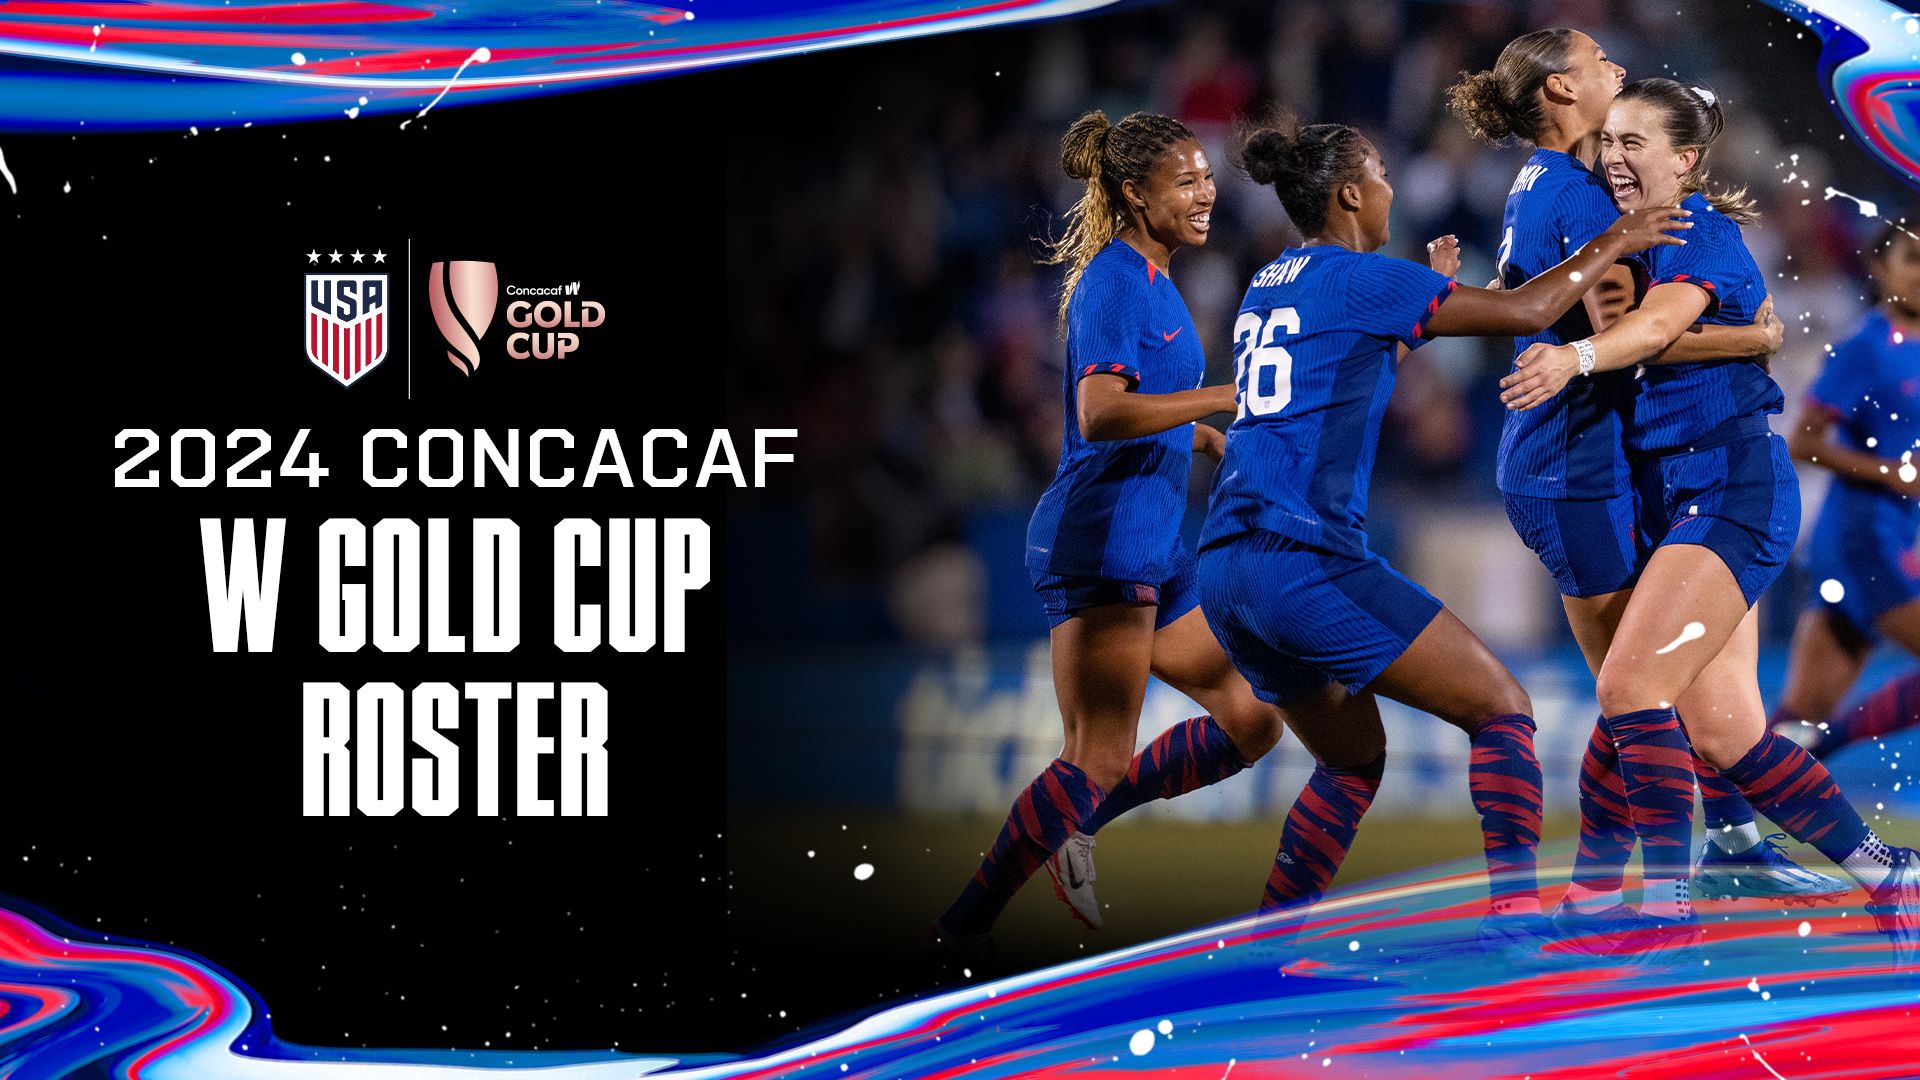 USWNT Announces 23-Player Roster for 2024 Concacaf W Gold Cup at Dignity Health Sports Park